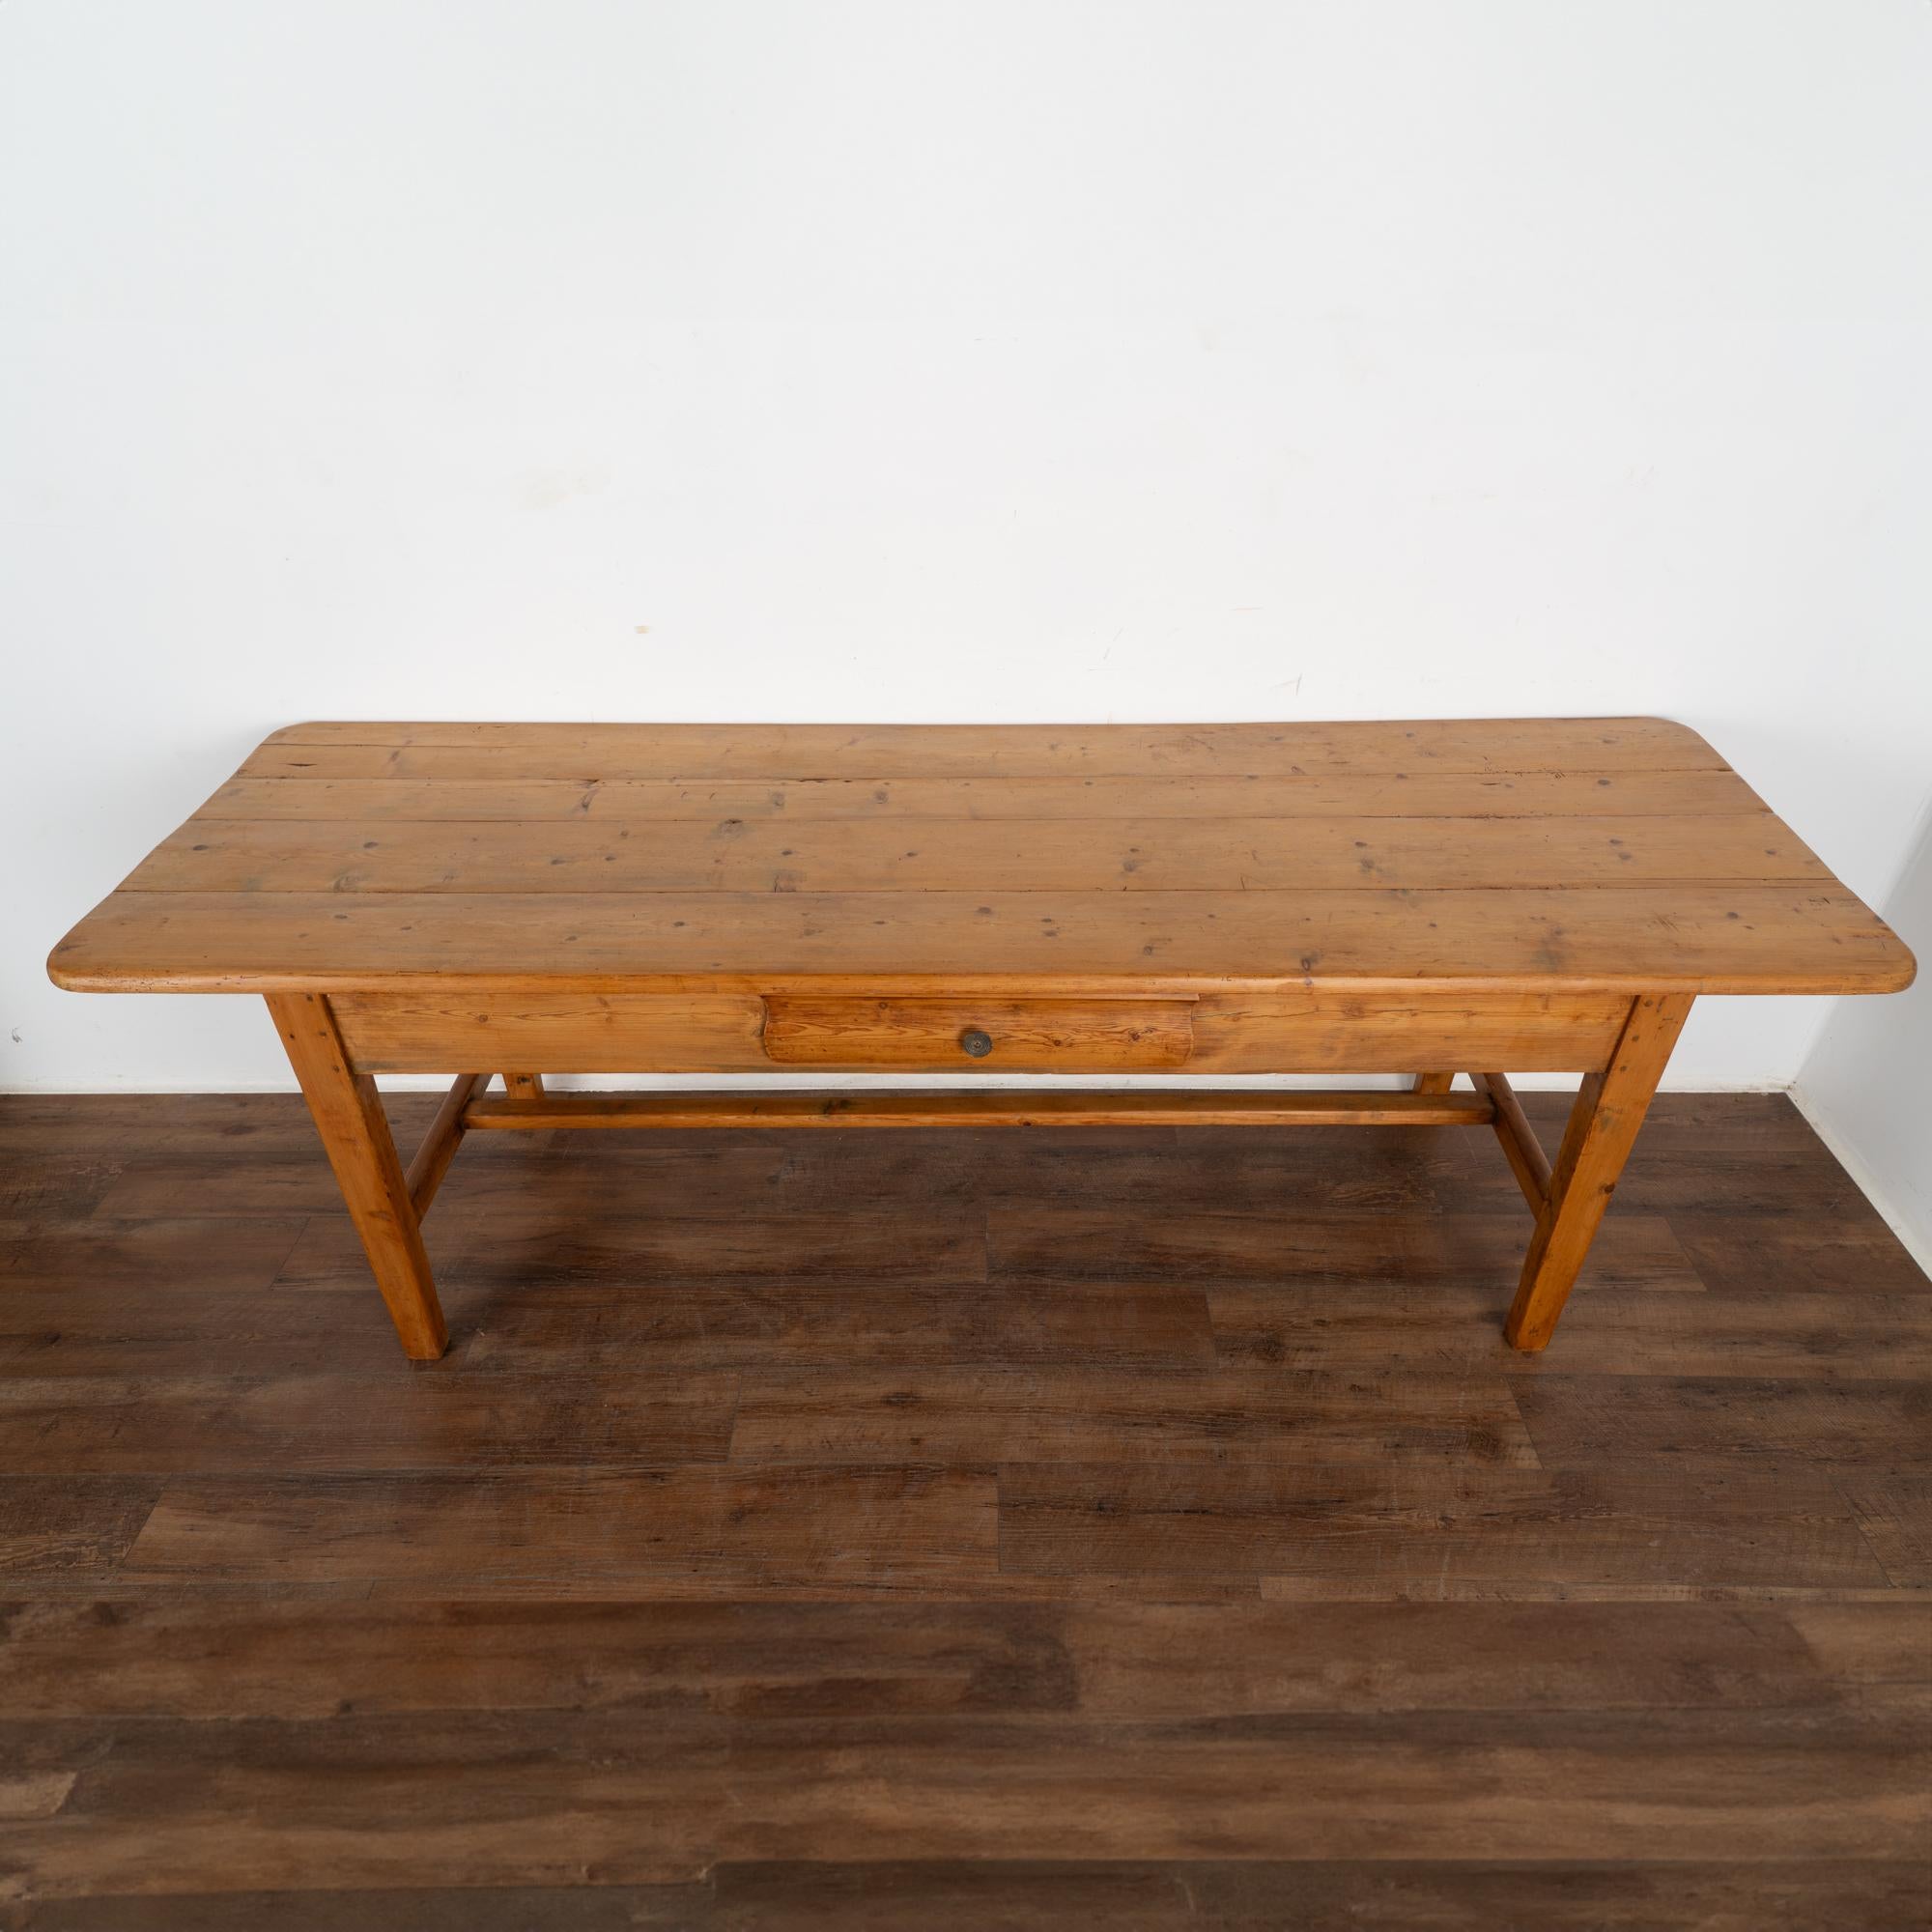 Swedish Pine Farm Table With Single Drawer, Sweden circa 1840 For Sale